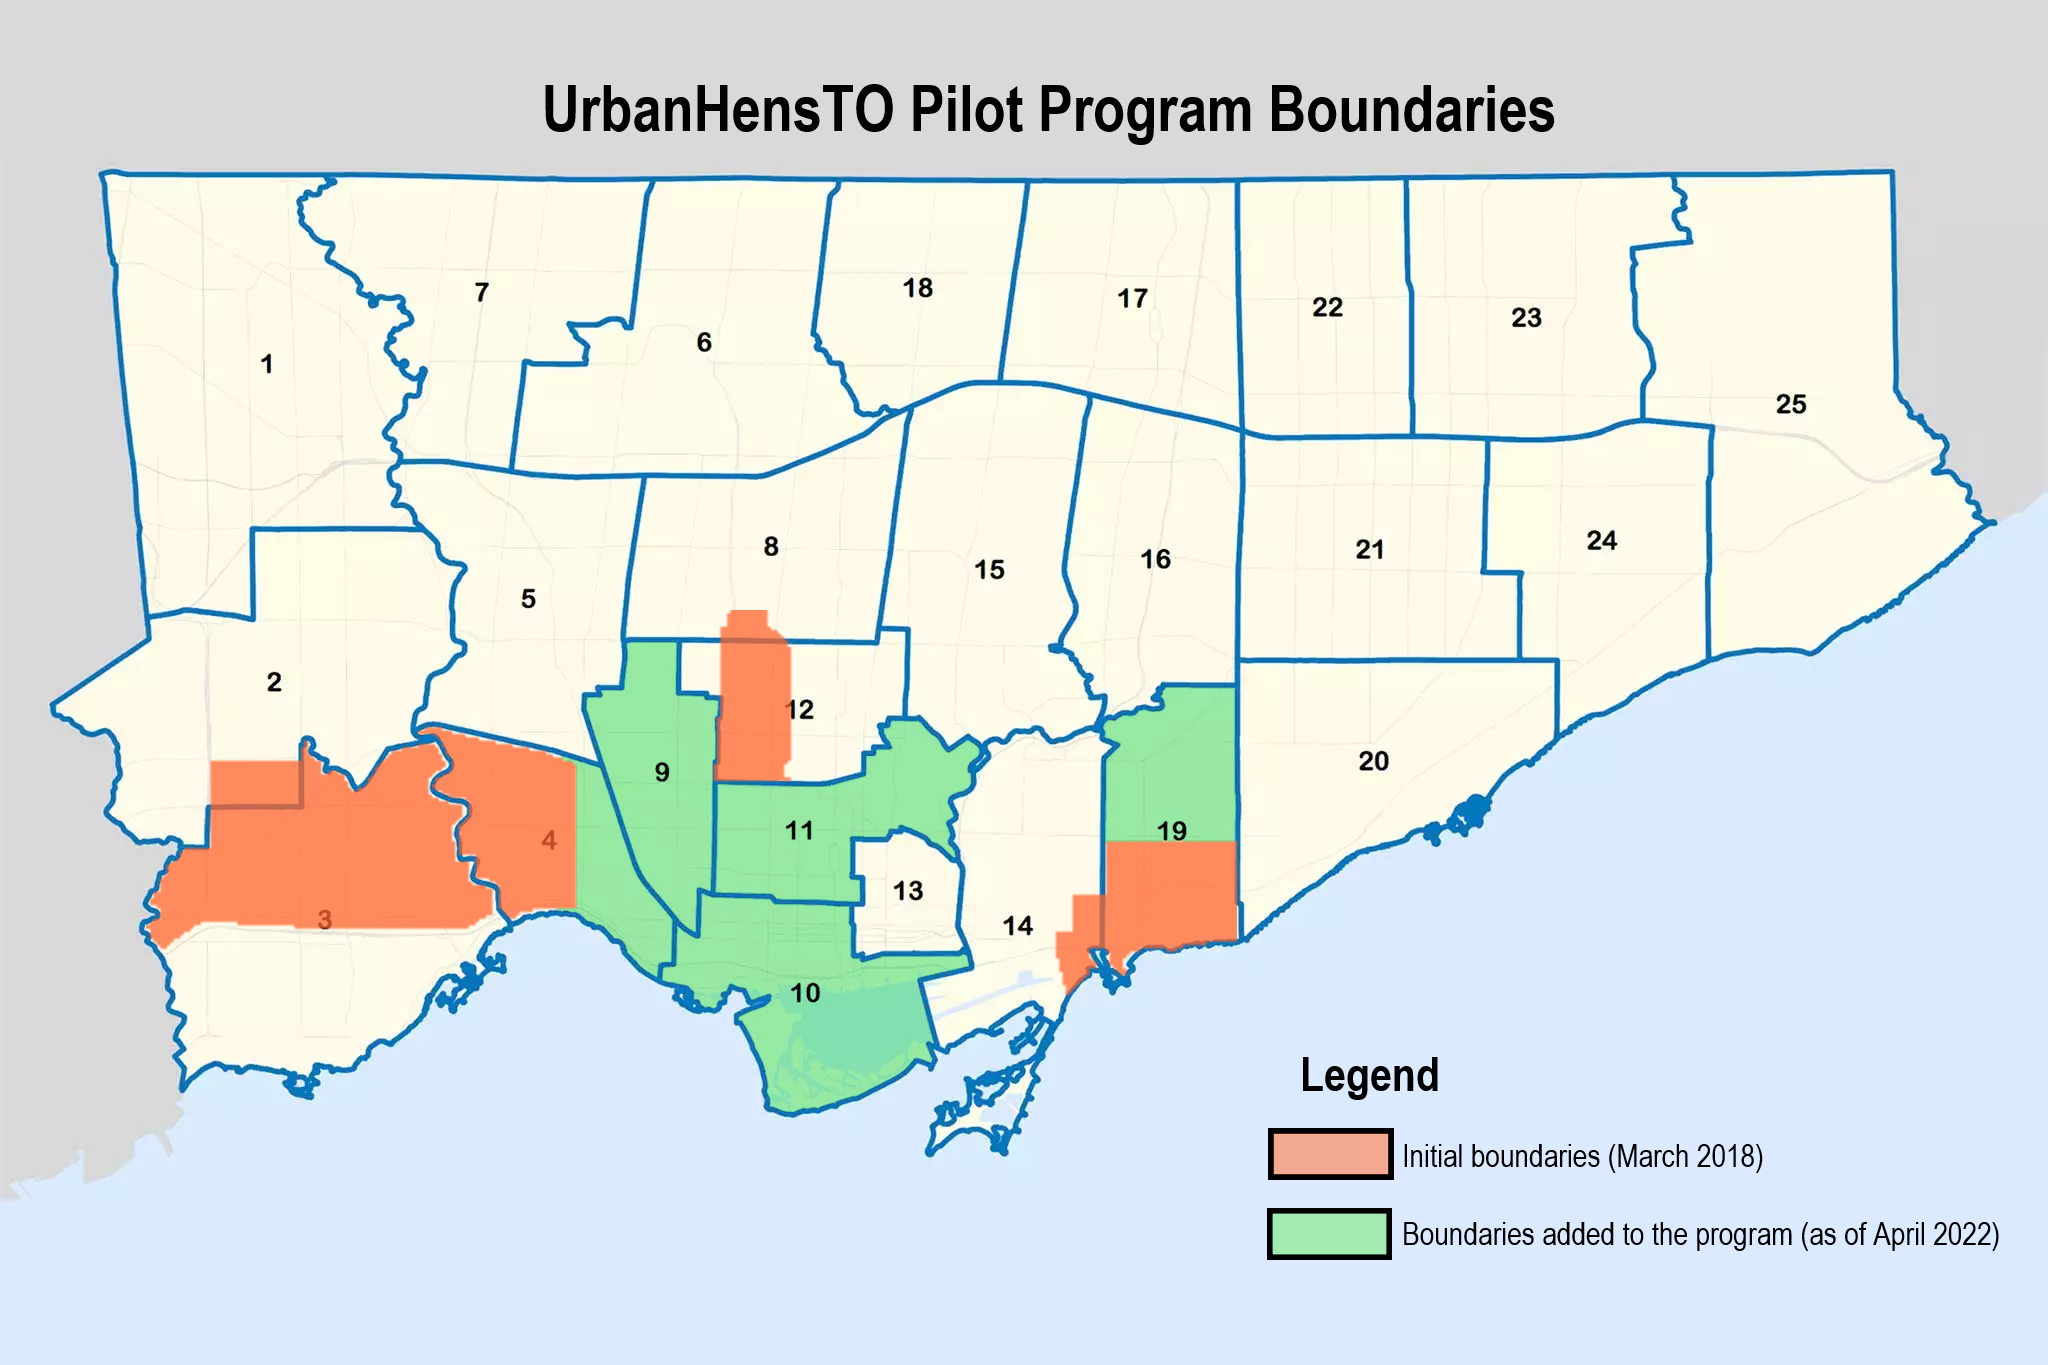 The duration and permitted areas of the UrbanHensTO pilot program have been extended several times since 2018. The pilot program was permitted in Wards 4, 9, 10, 11, and 19, and parts of Wards 2, 3, 8, 12 and 14.